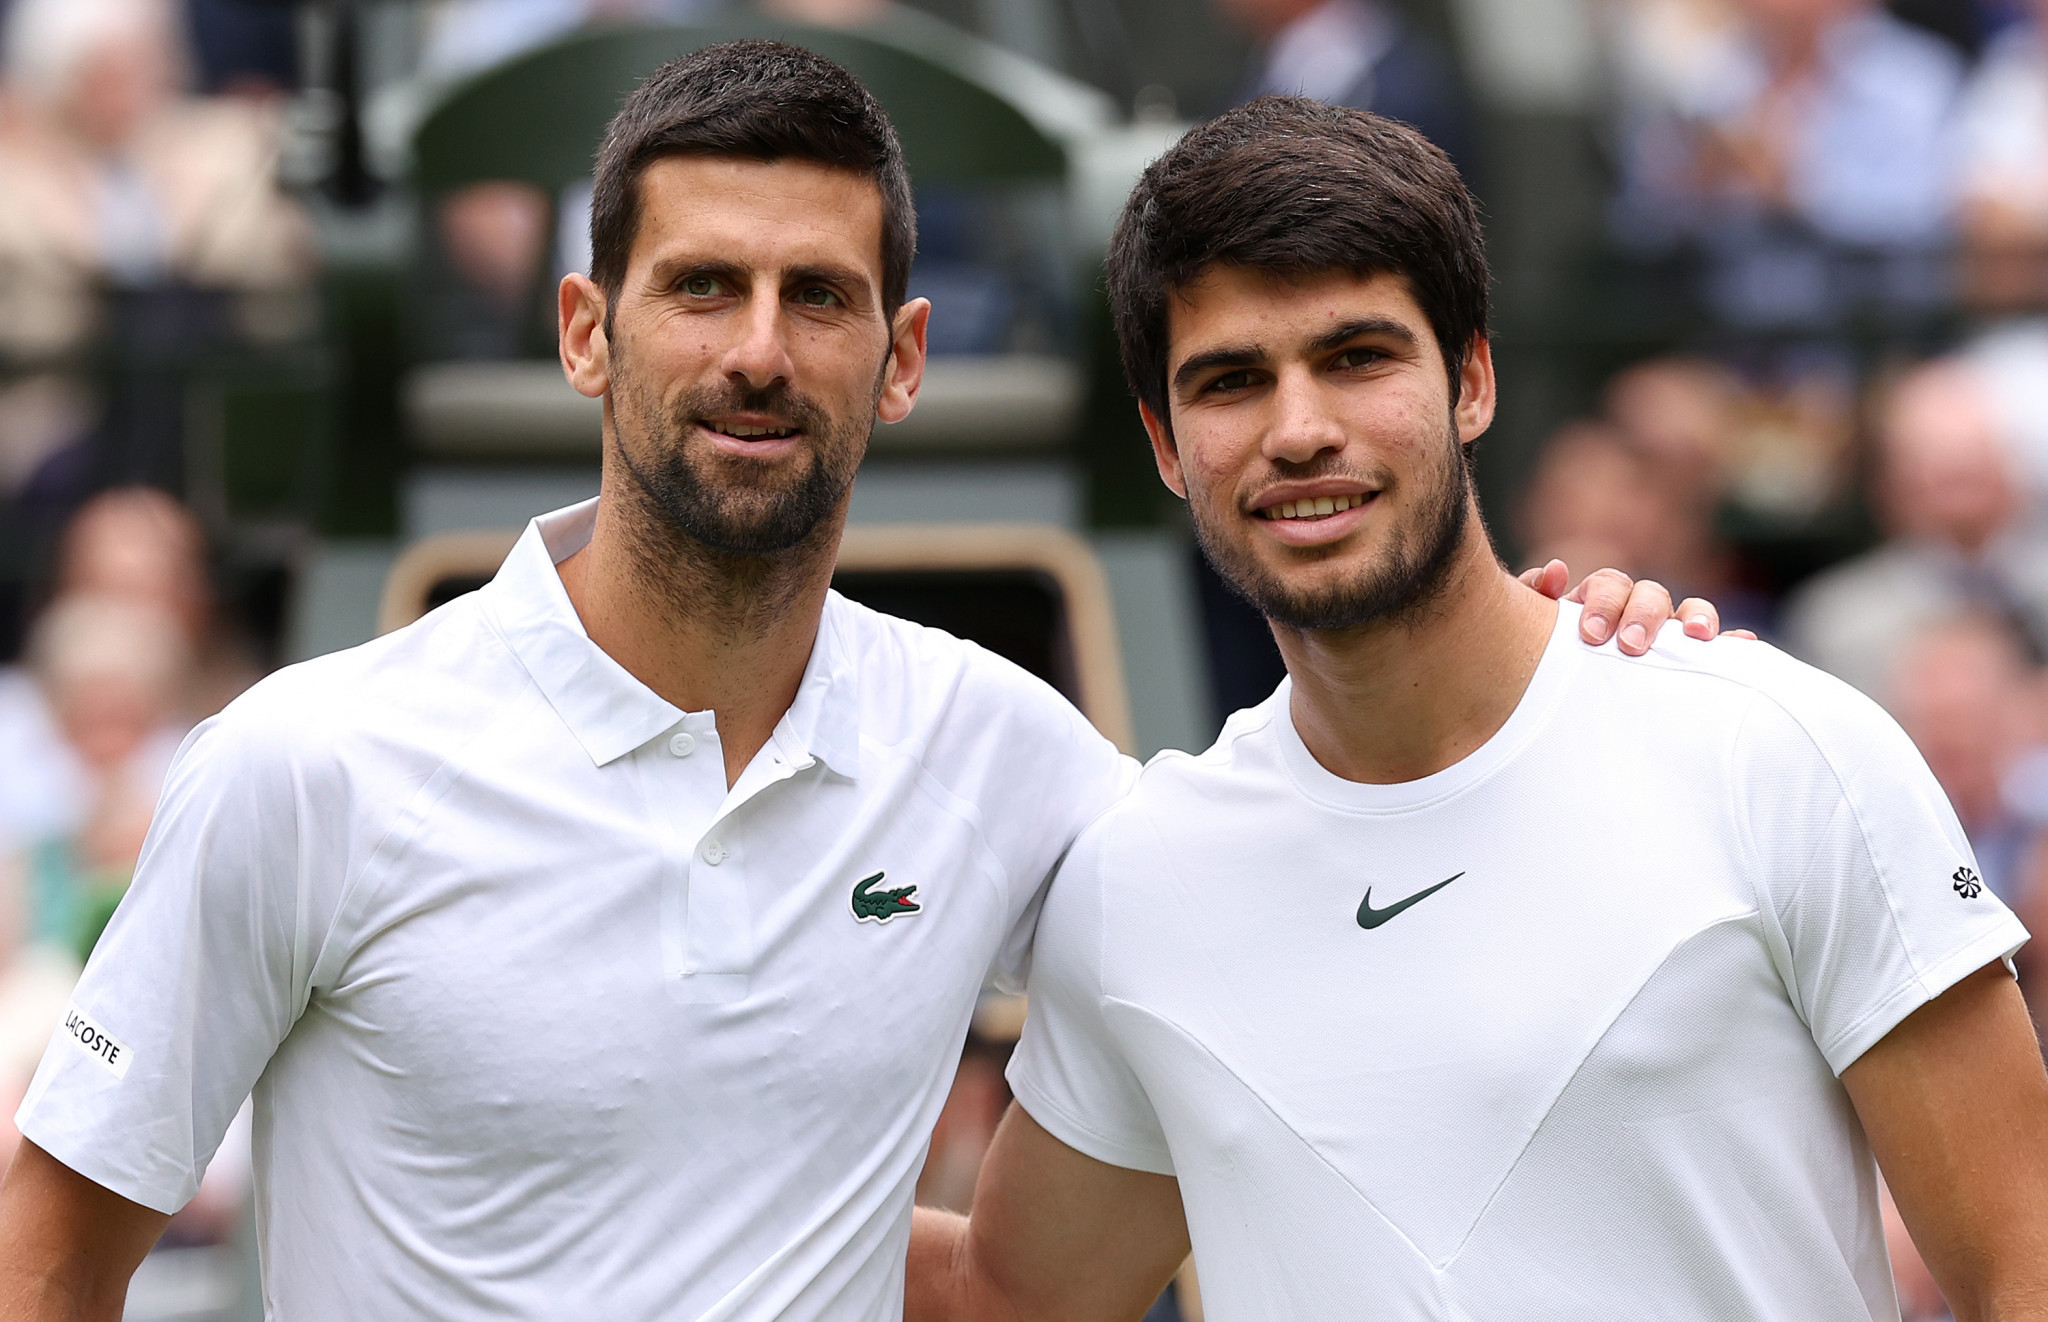 Alcaraz and Djokovic tussle to continue at US Open while Świątek seeks second title